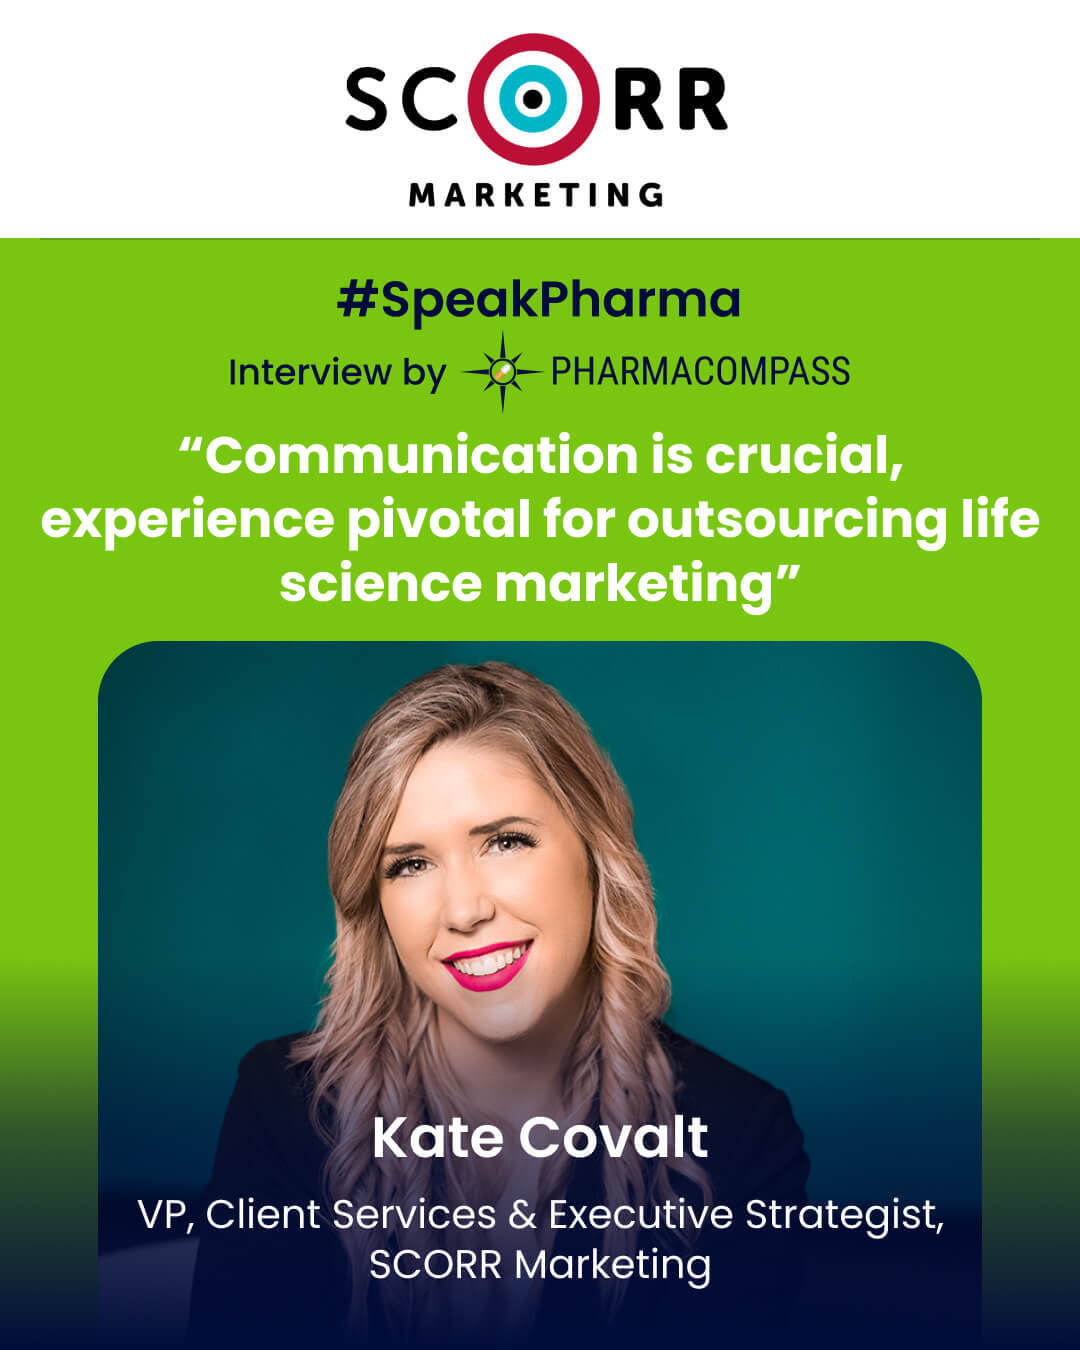 “Communication is crucial, experience pivotal for outsourcing life science marketing”